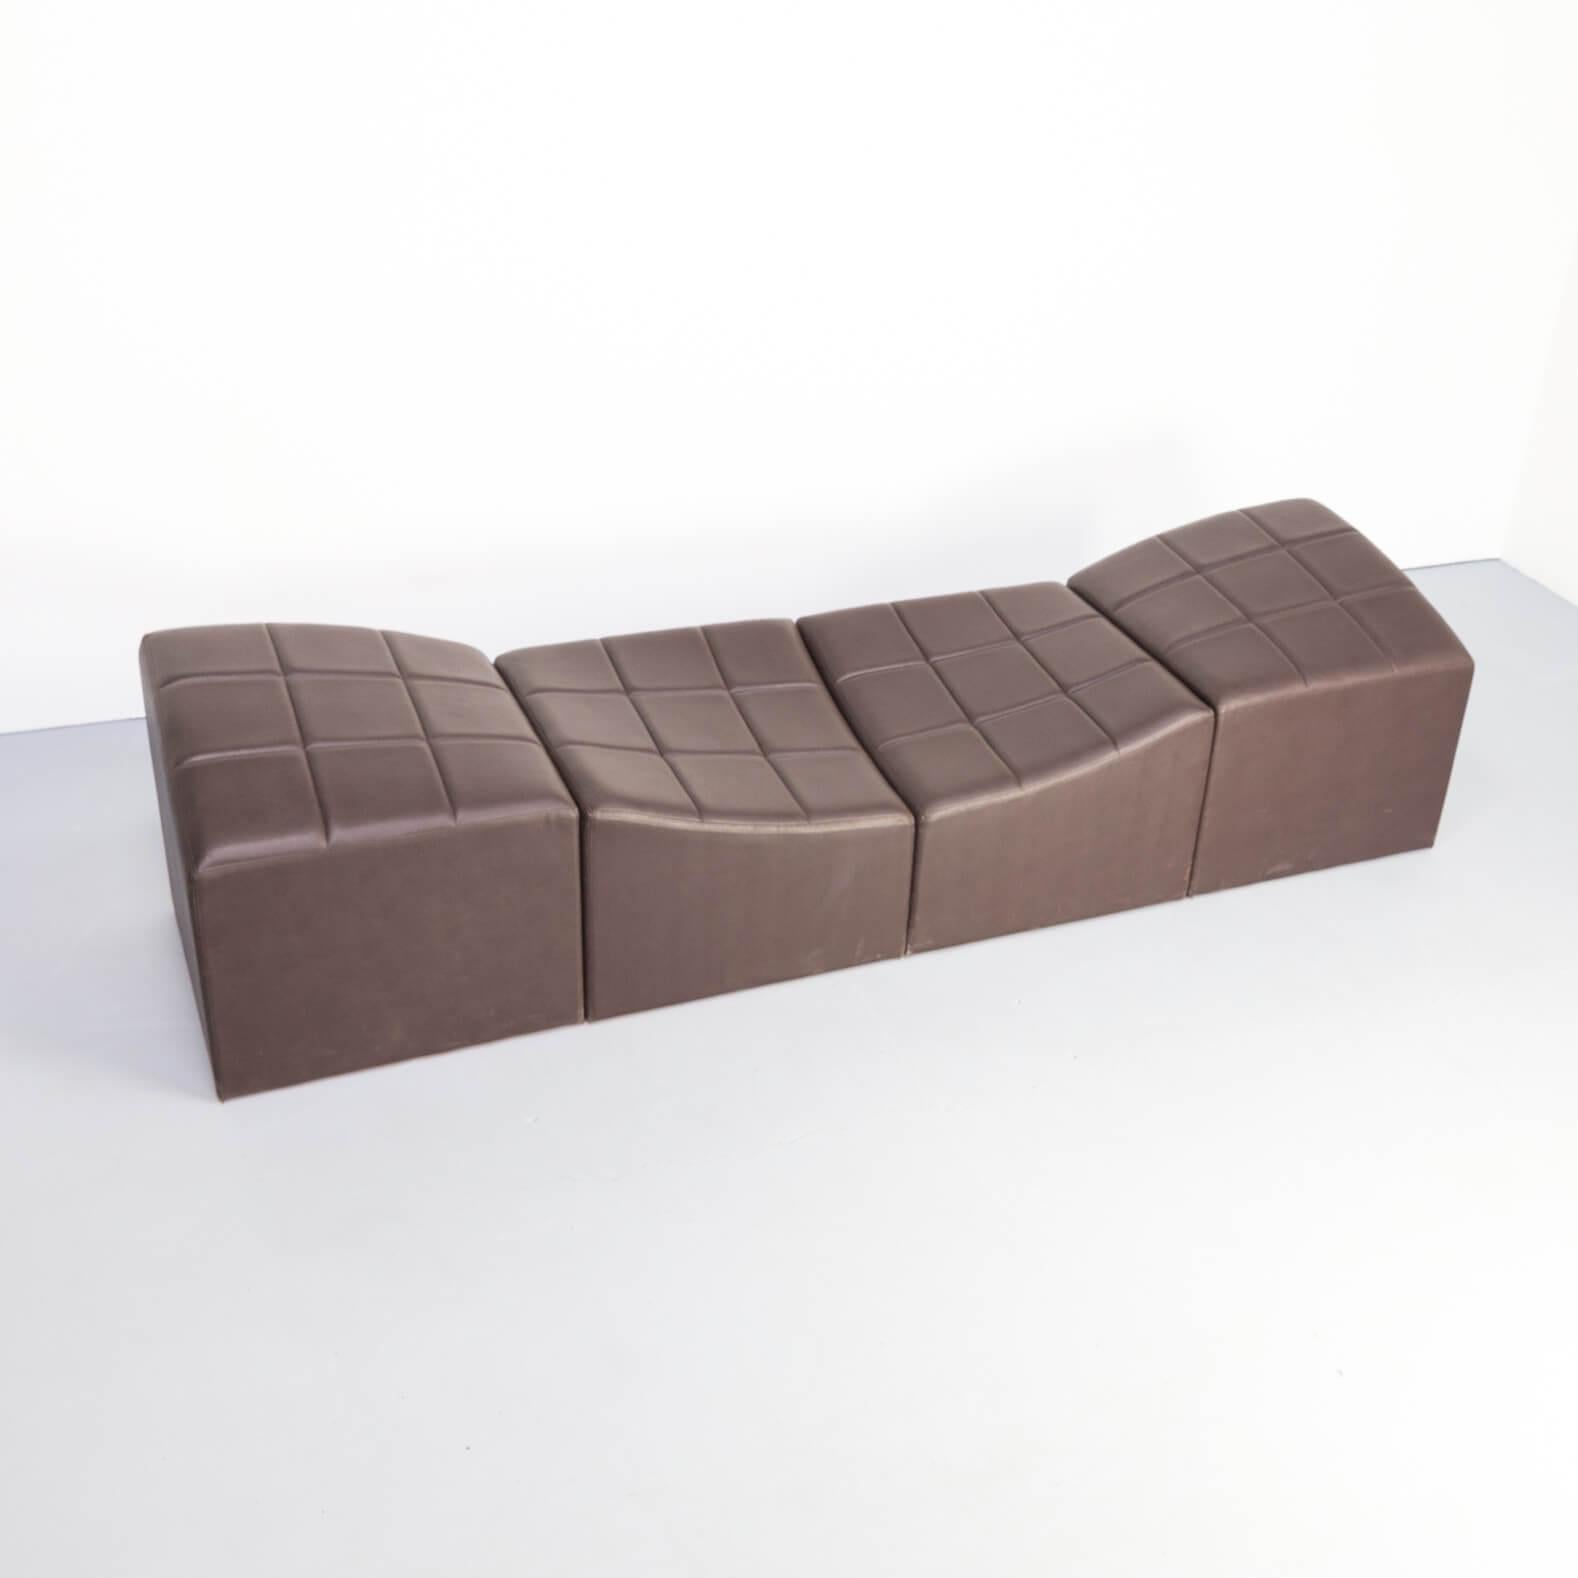 1970s Rare Modular Four Parts Sofa Daybed For Sale 6